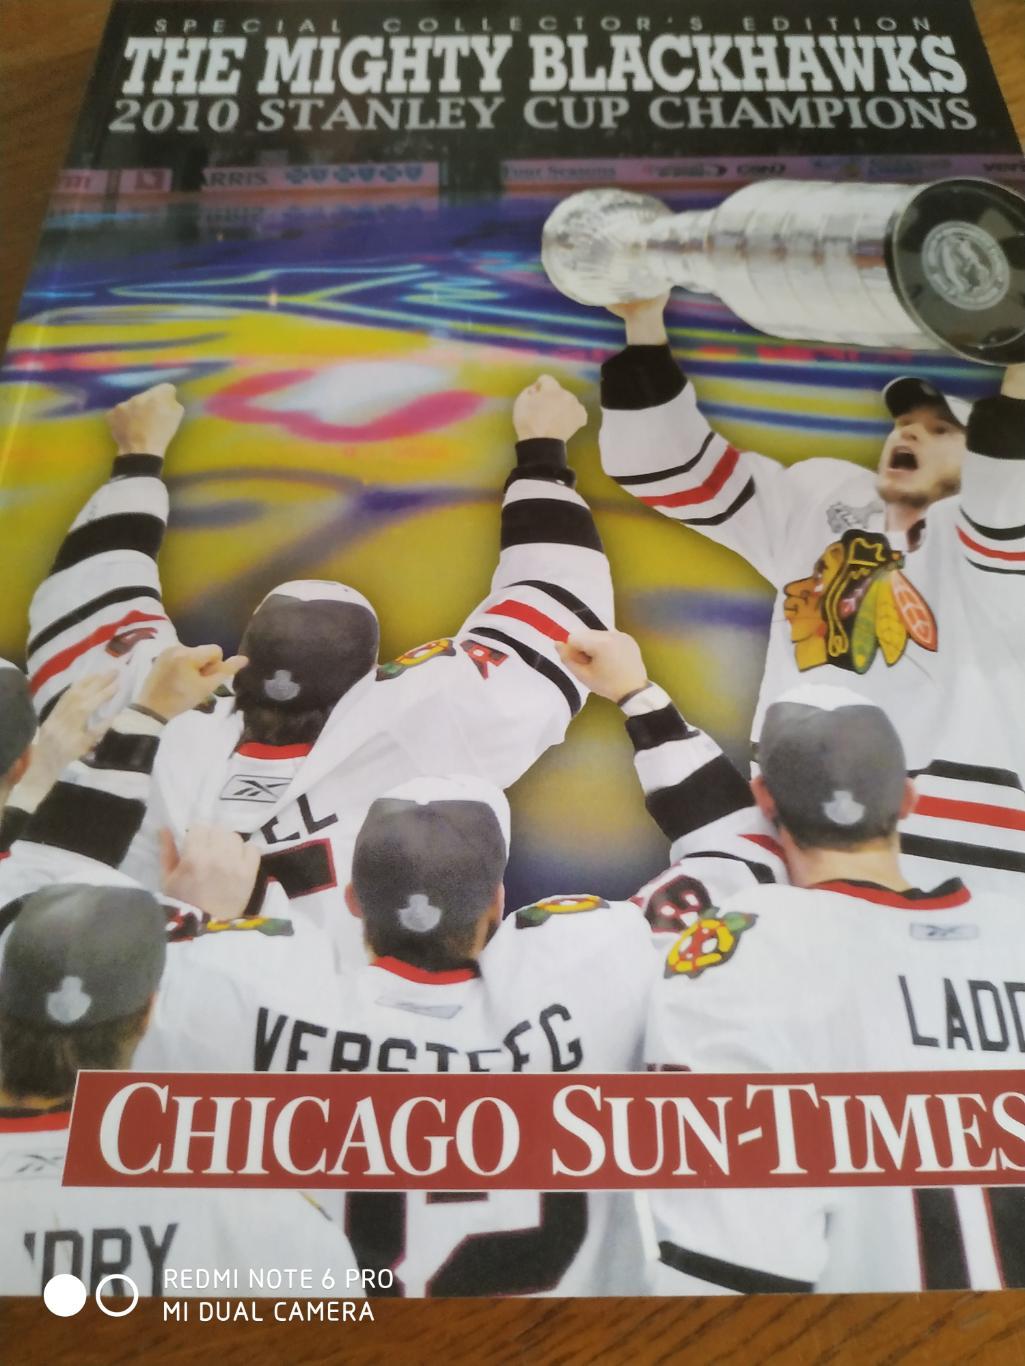 THE MIGHTY BLACKHAWKS 2010 STANLEY CUP CHAMPIONS